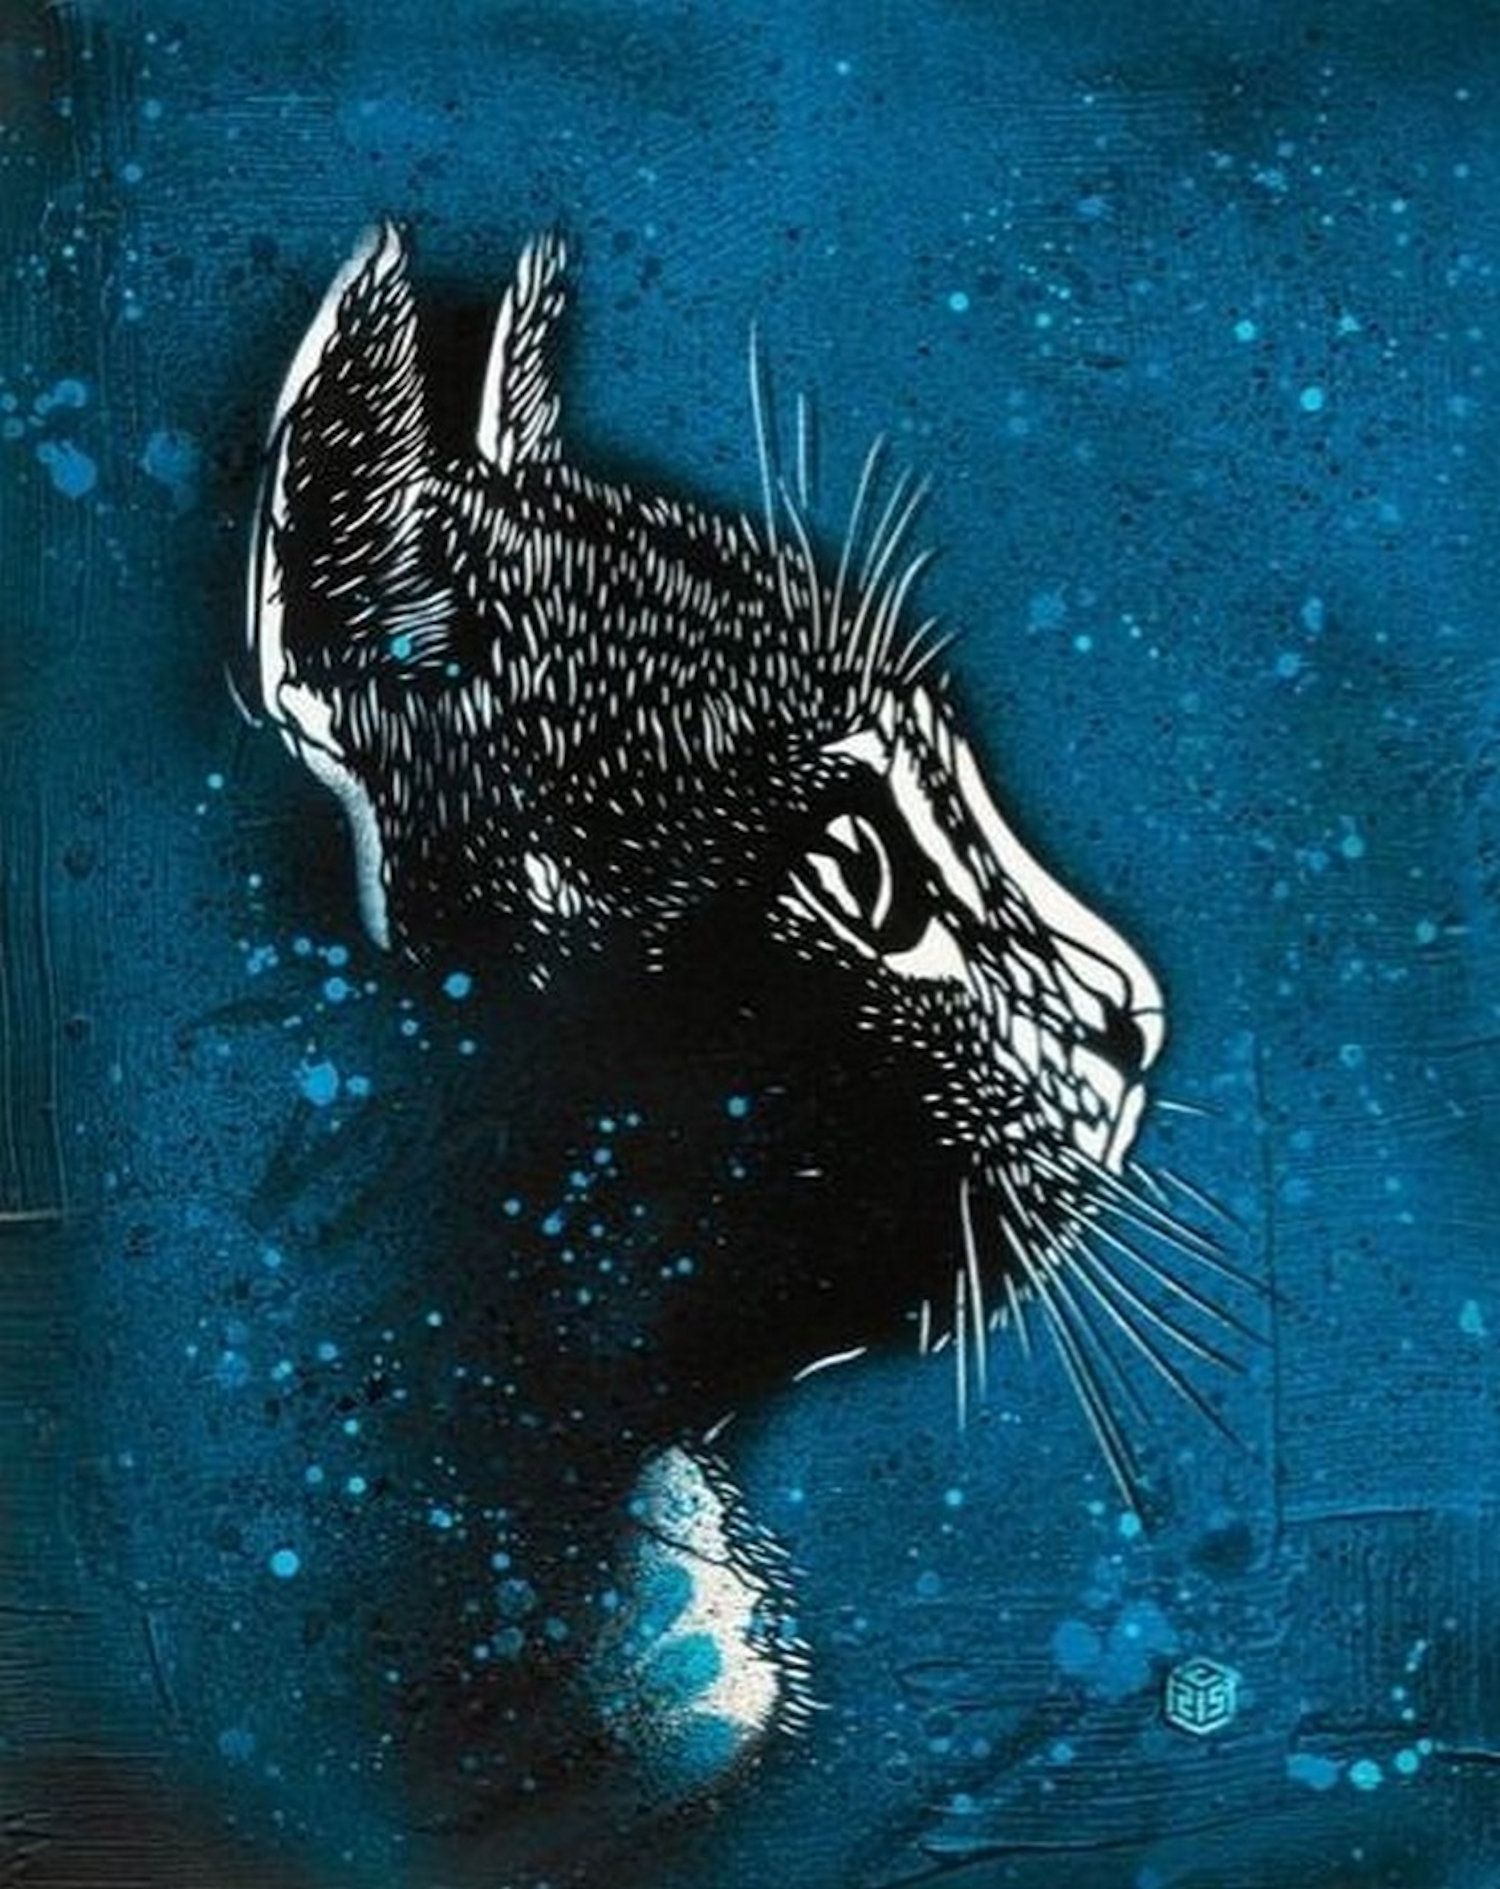 C215 C215

Blue Felix, 2020

Digital print on canson paper.

Signed by C215 and &hellip;